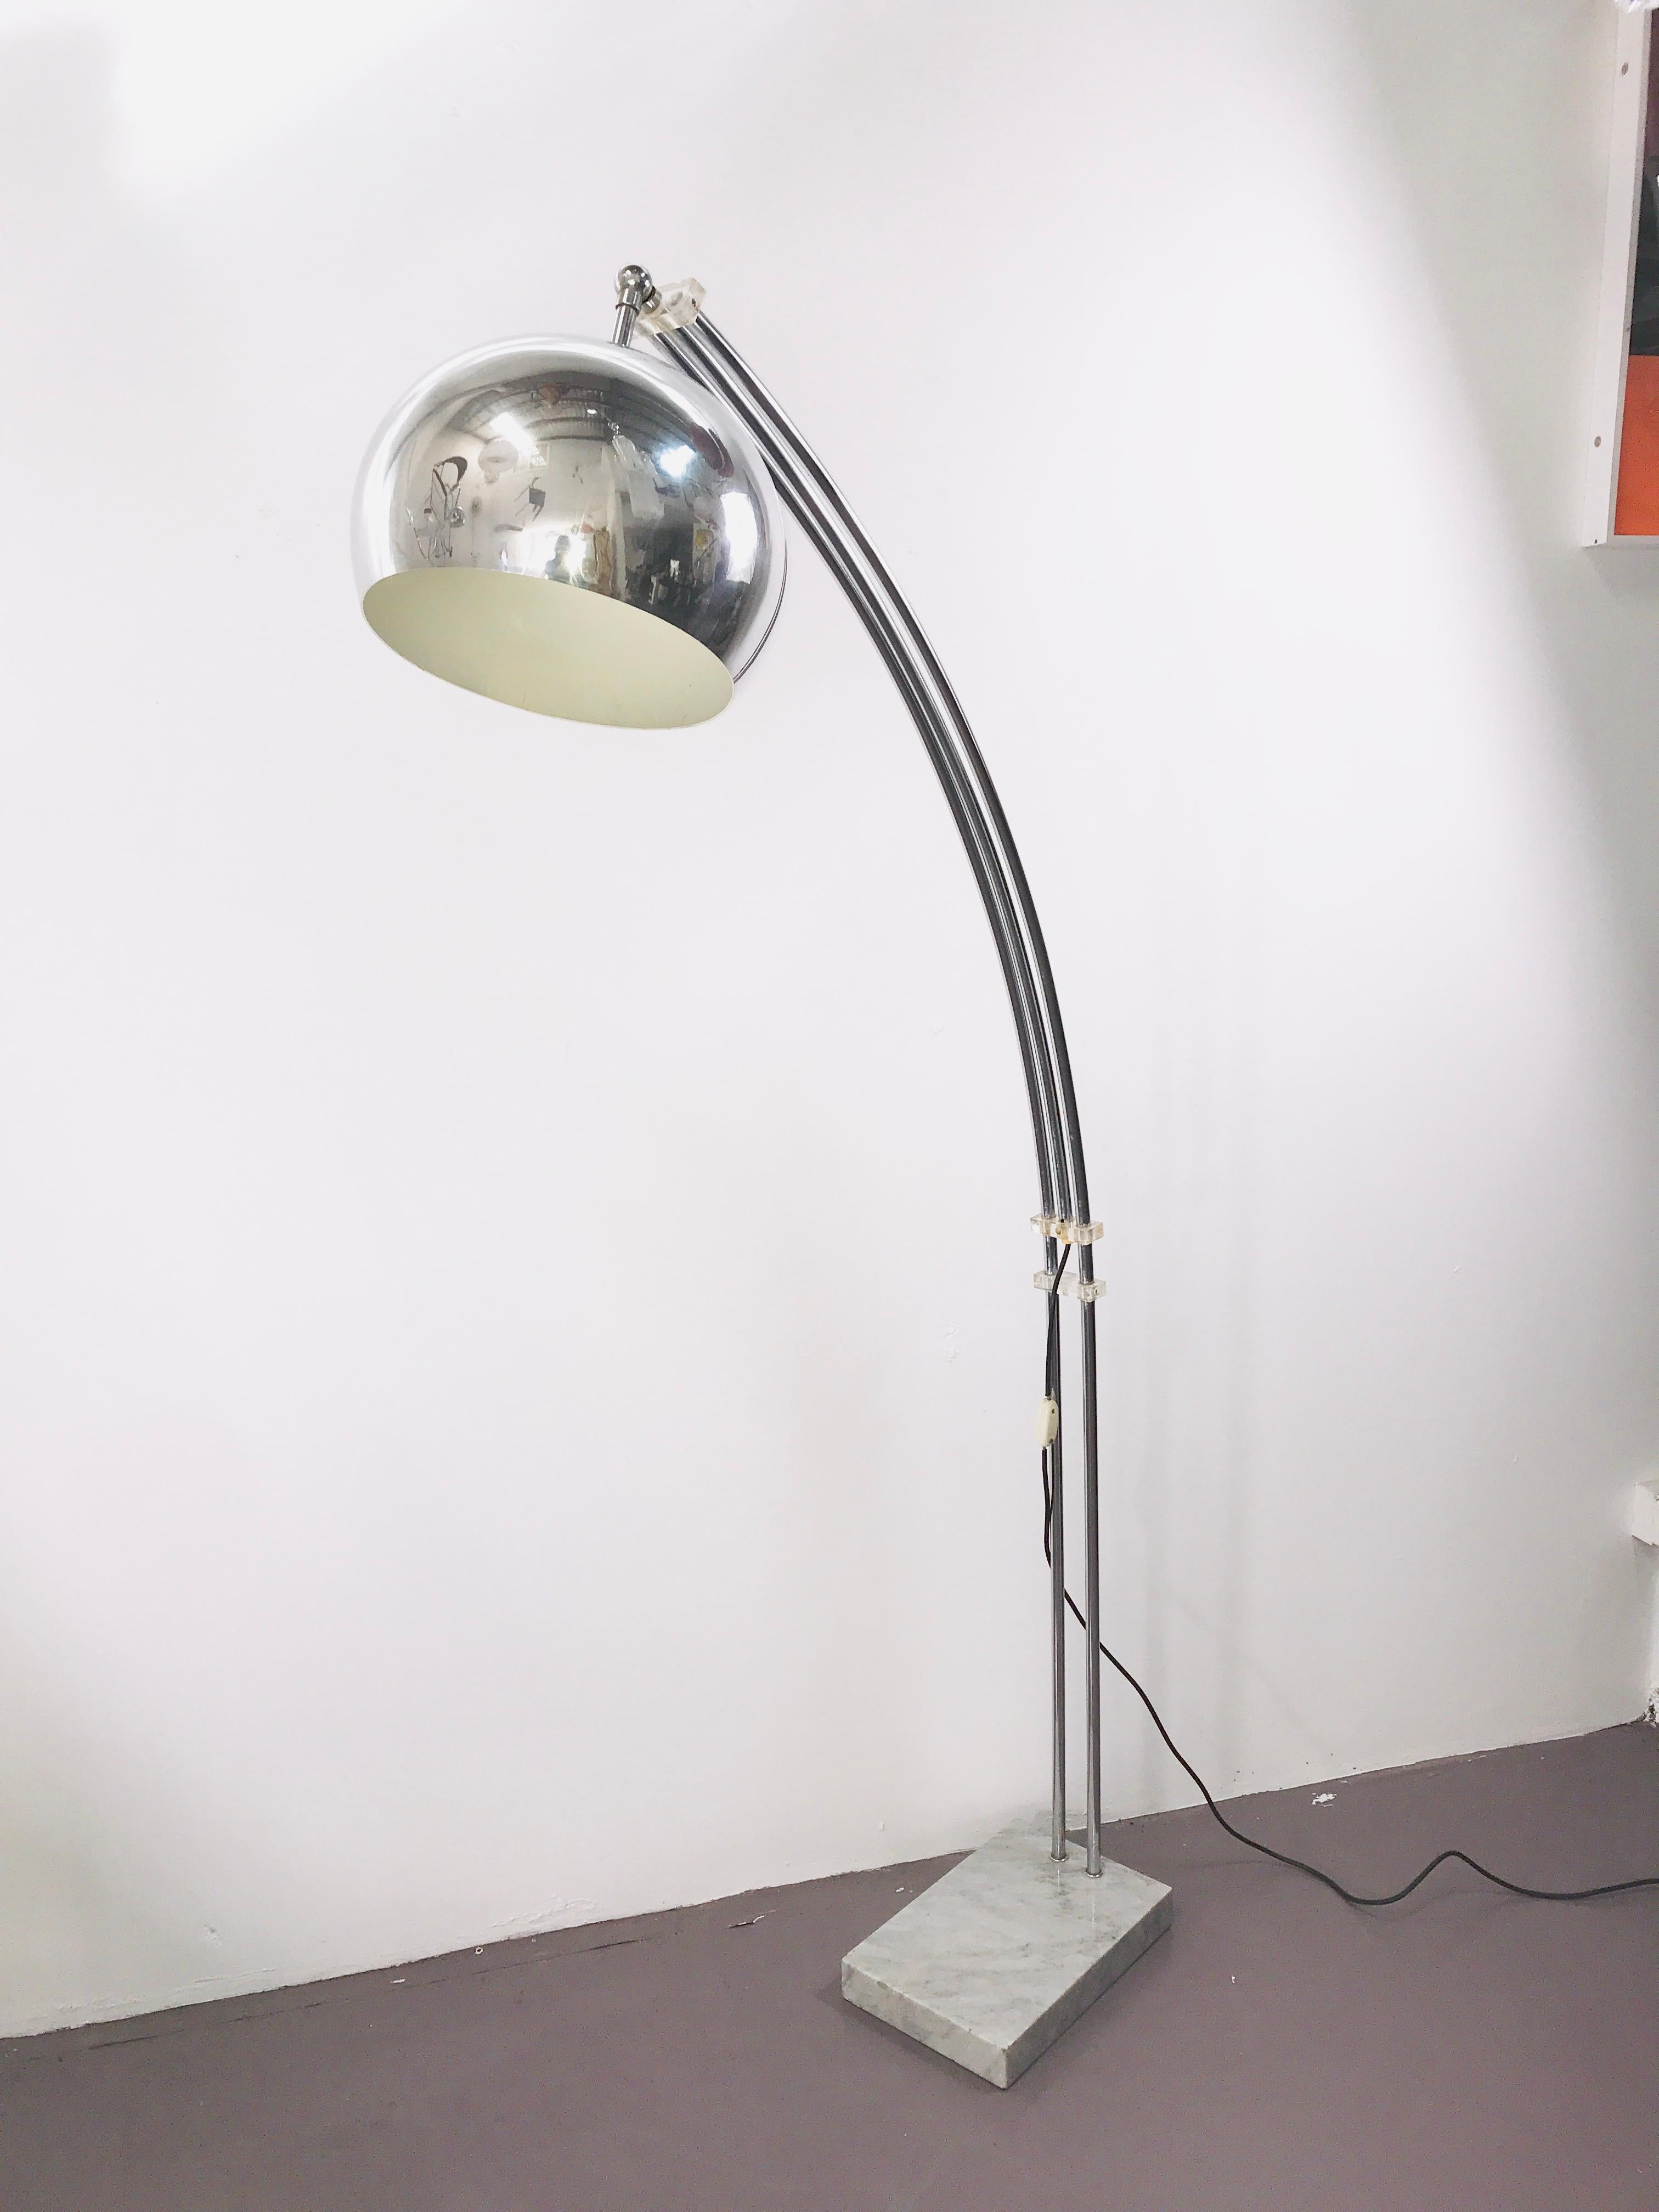 Beautiful midcentury arc lamp in chrome and gray marble base.
The main arm has made from the chrome tubes that make the special even more spectacular.
Perfect working condition.